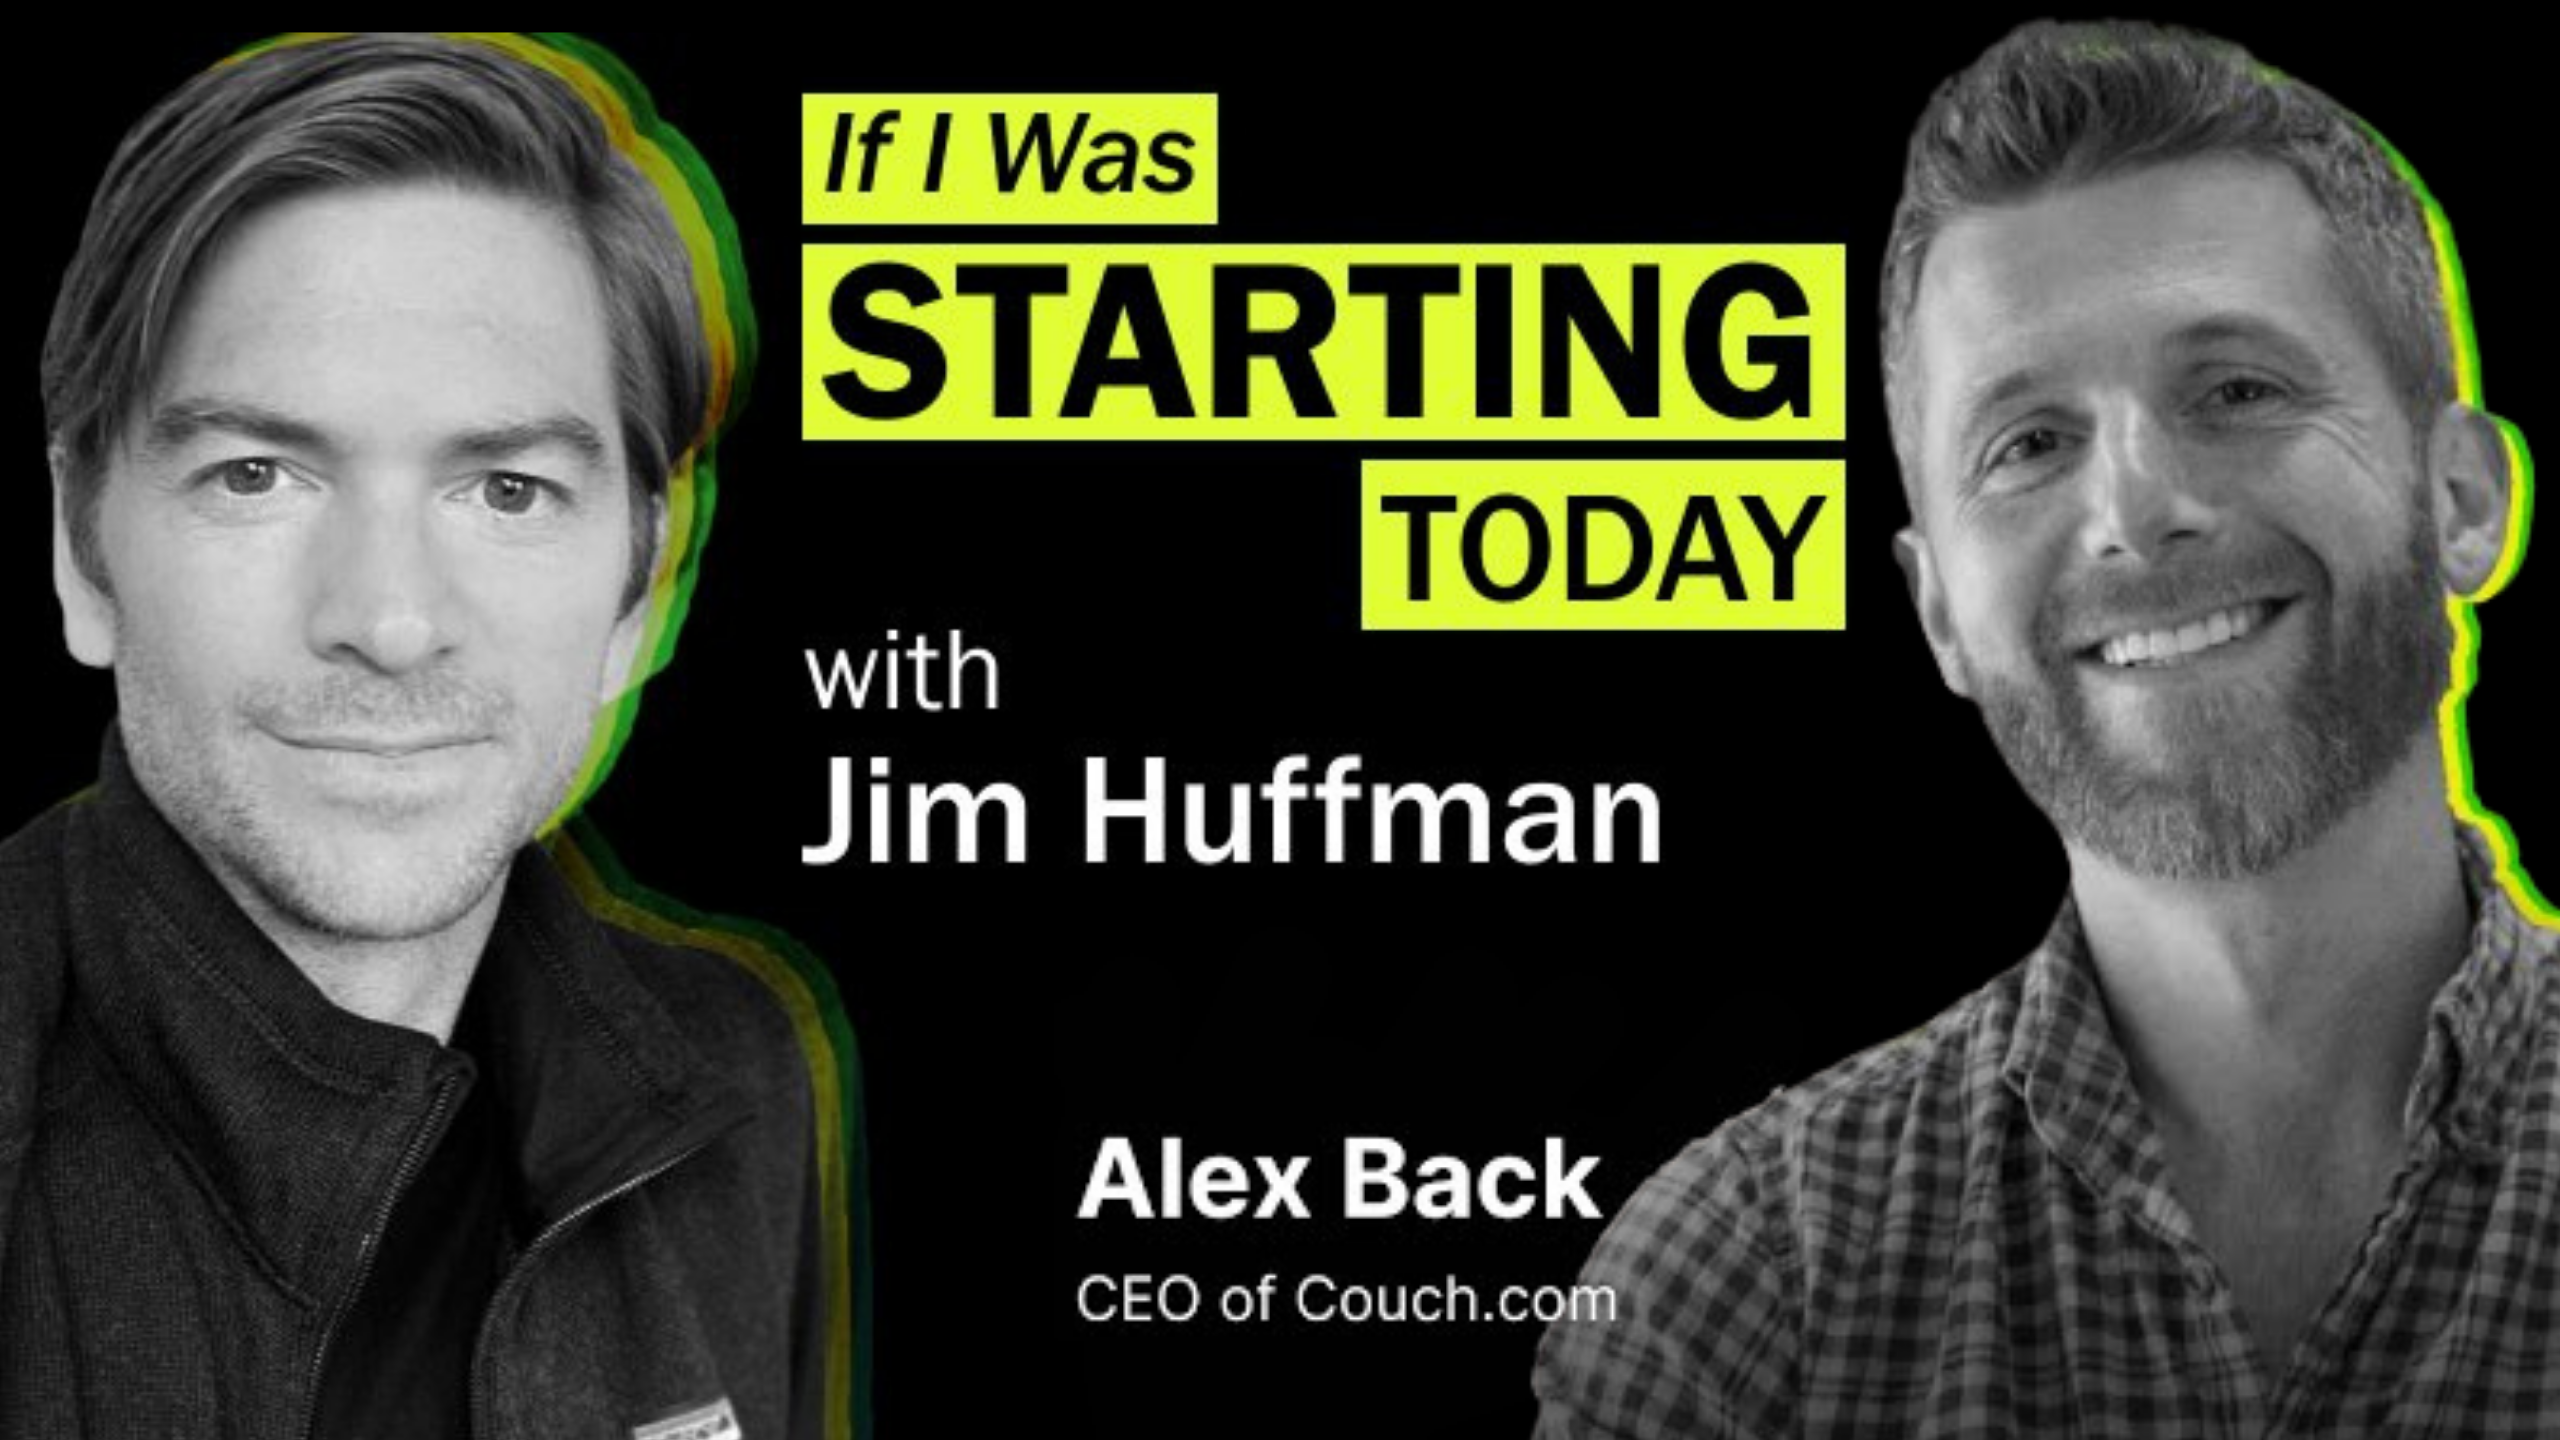 Black and white promotional image for the "If I Was Starting Today" podcast with Jim Huffman. The image features photos of two men, labeled Jim Huffman and Alex Back. Text: "Alex Back, CEO of Couch.com". The title "STARTING" is highlighted in yellow.